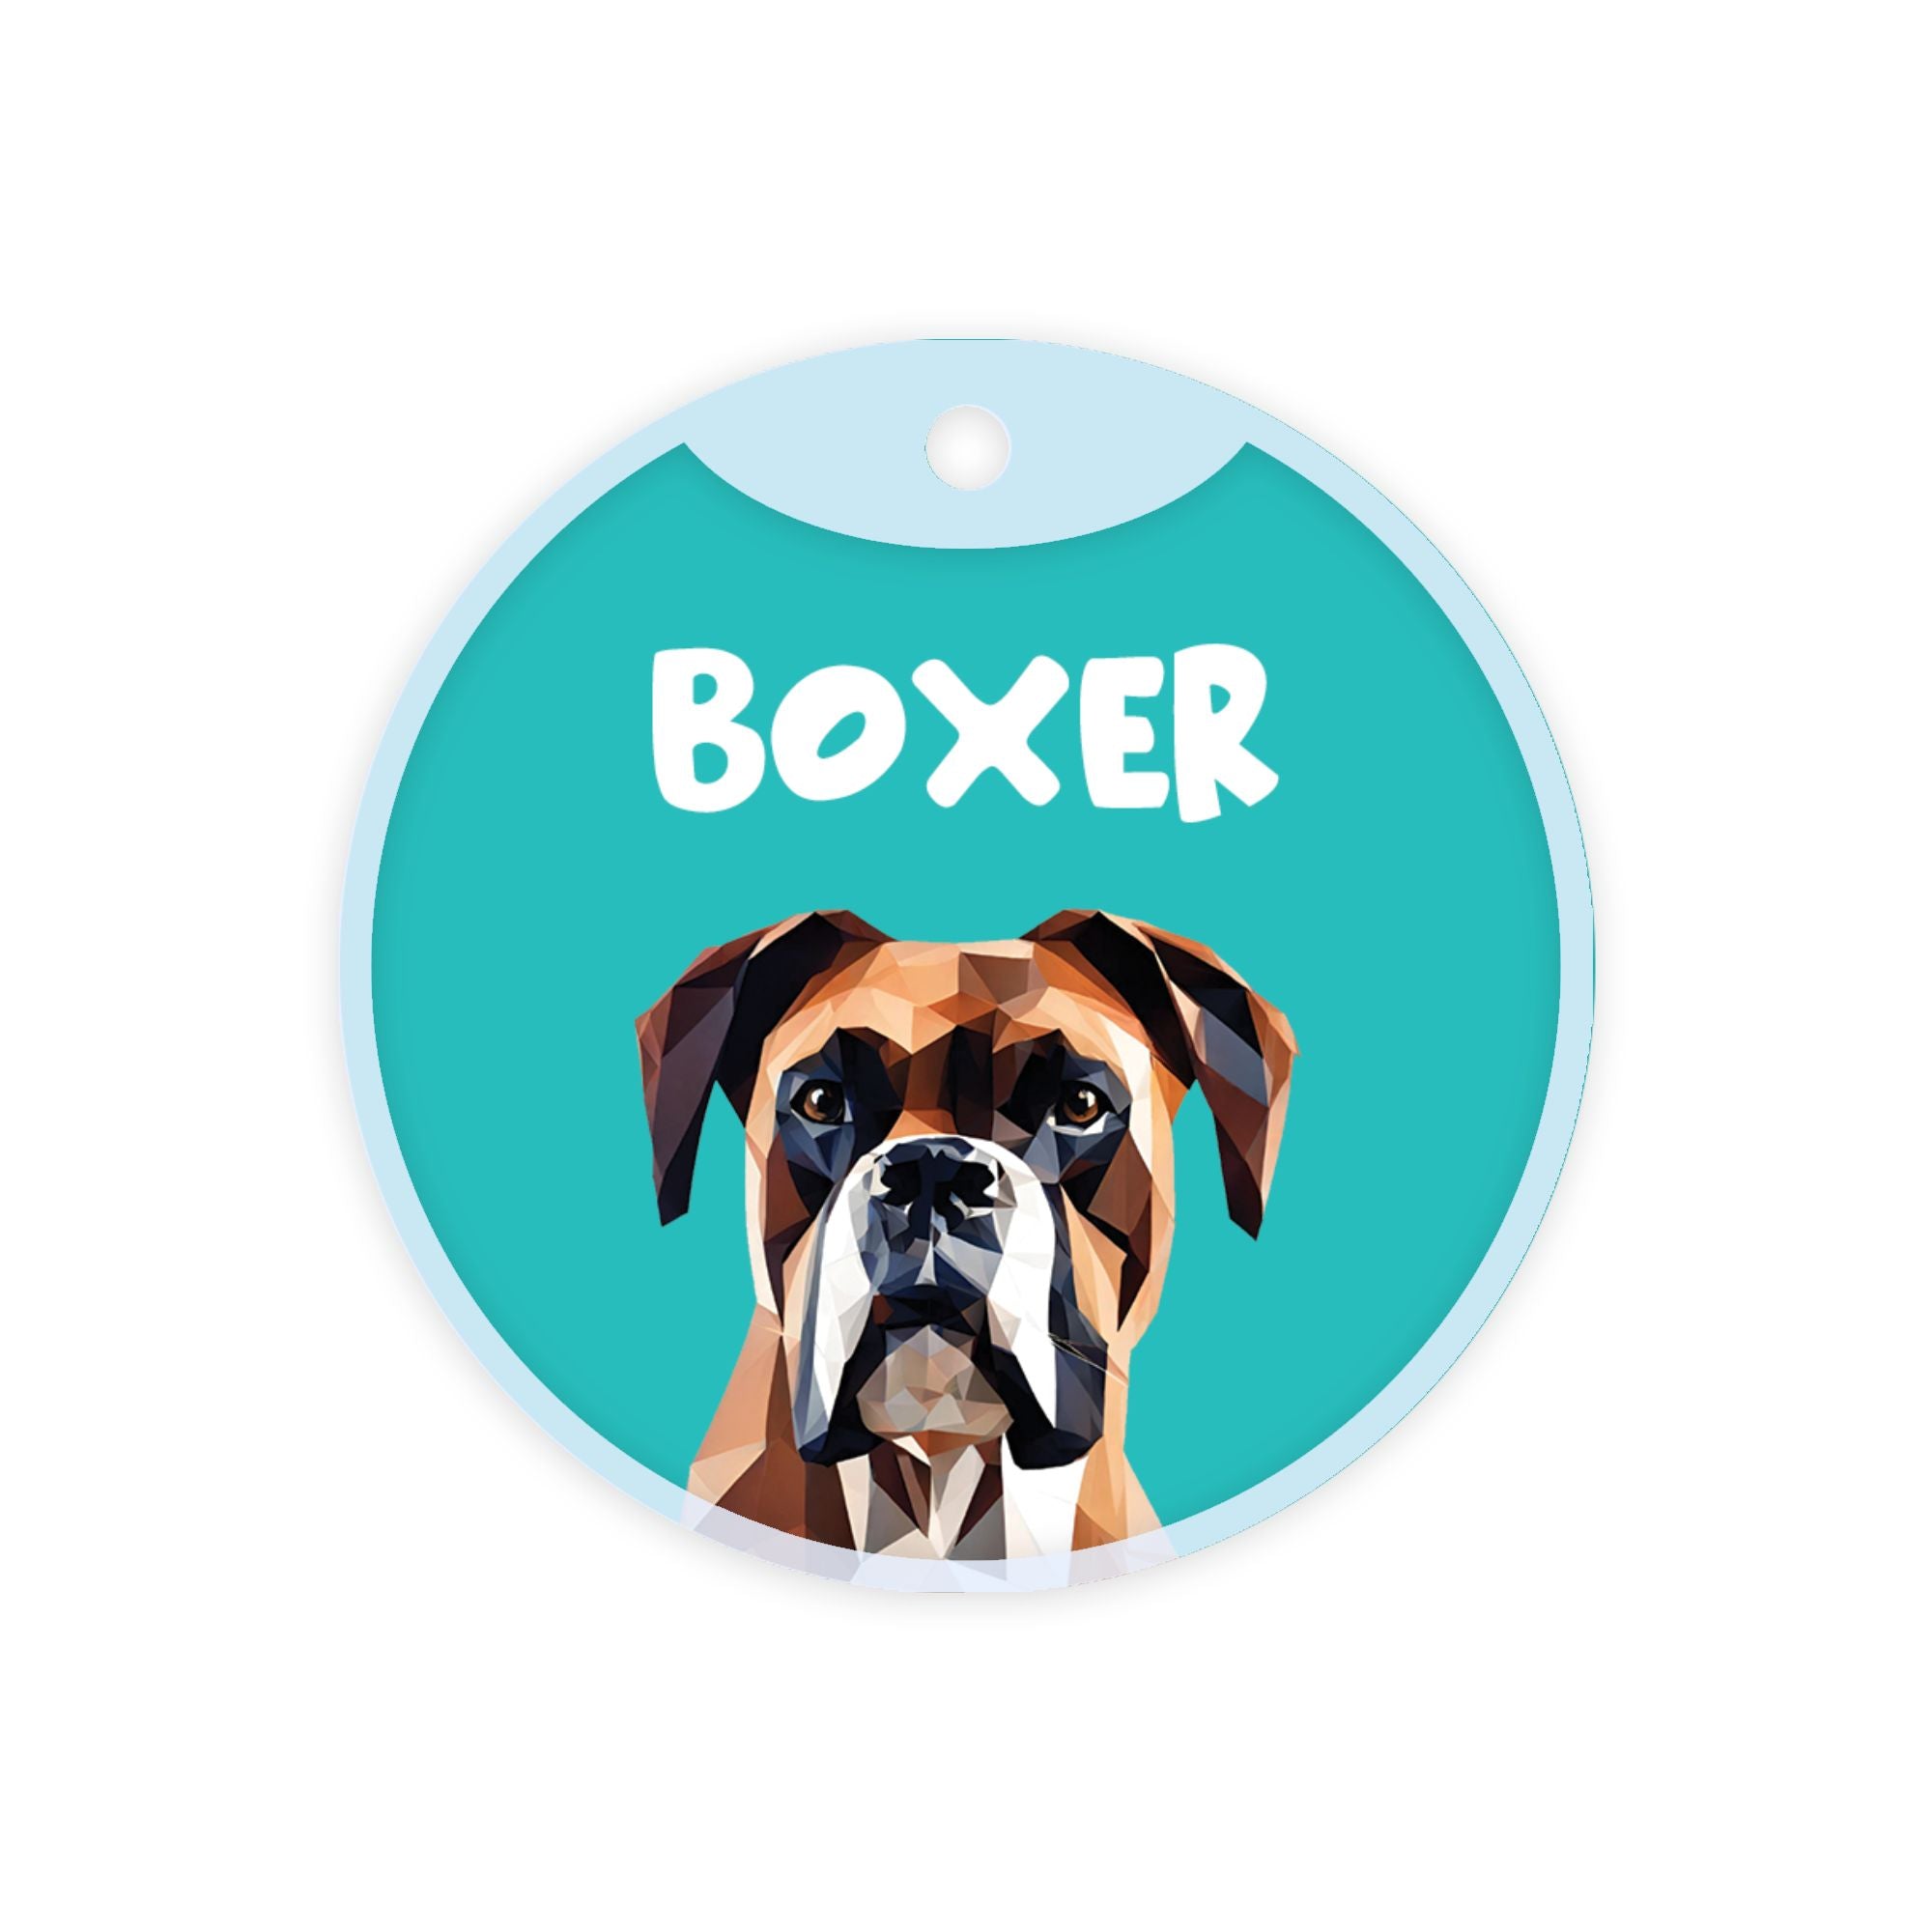 Customized Dog Id Tags - Boxer